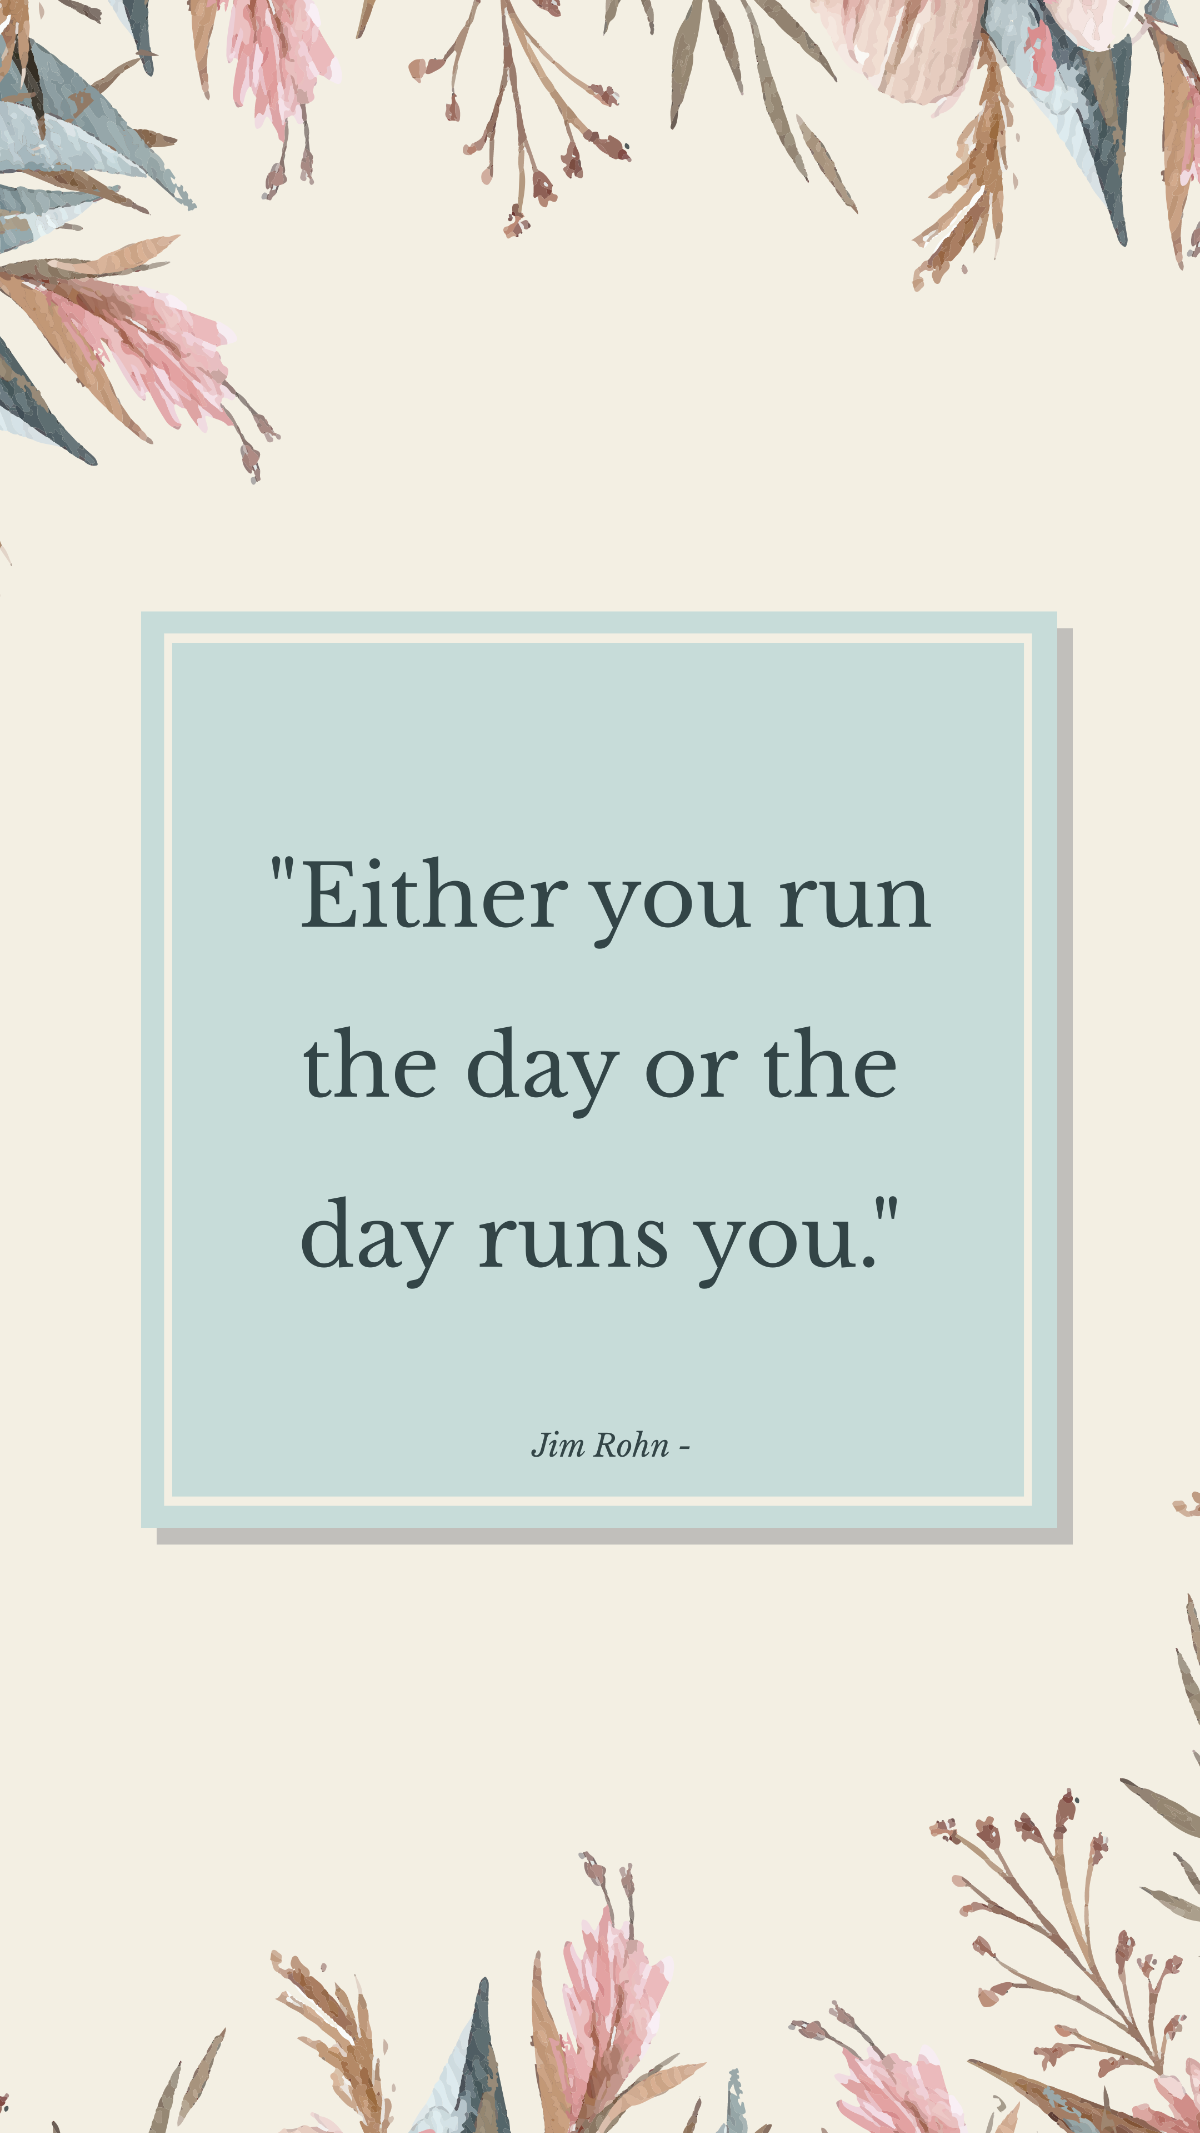 Jim Rohn - Either you run the day or the day runs you. Template